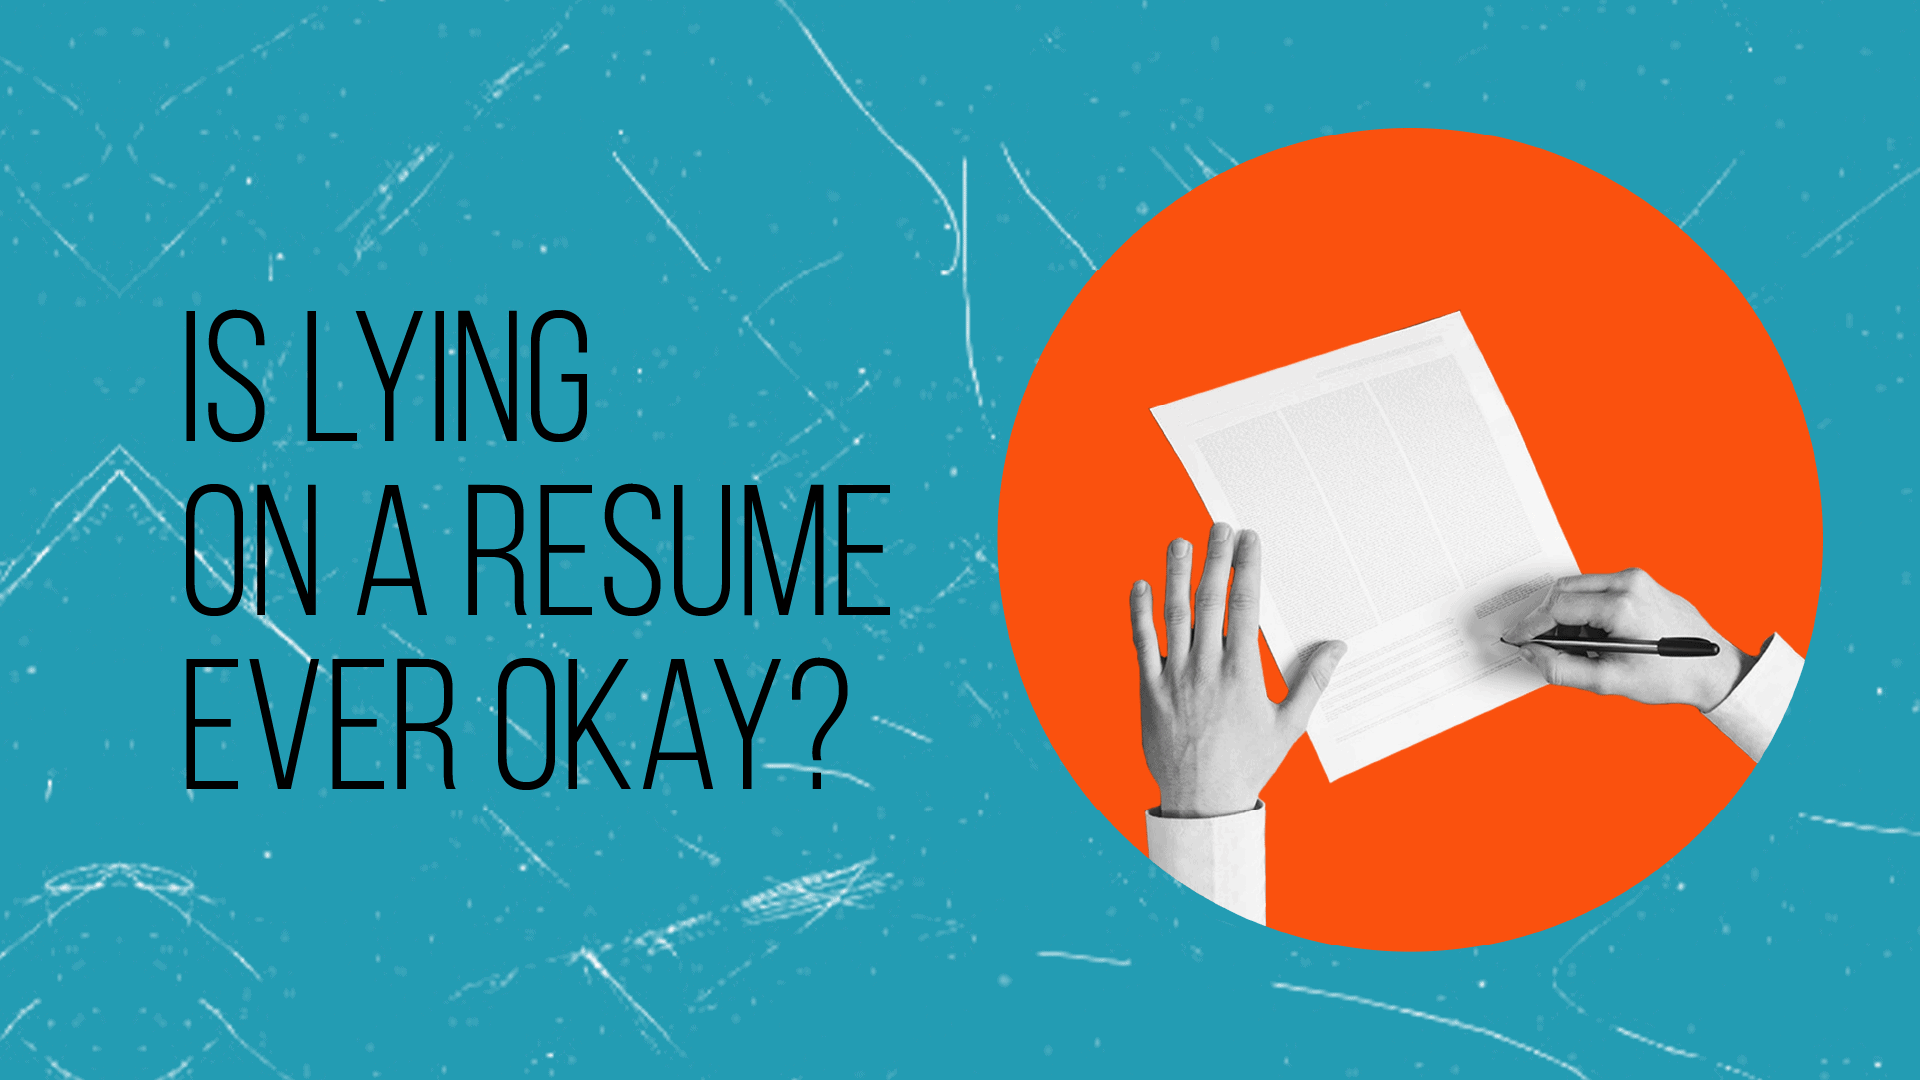 Is Lying on a Resume Ever Okay?